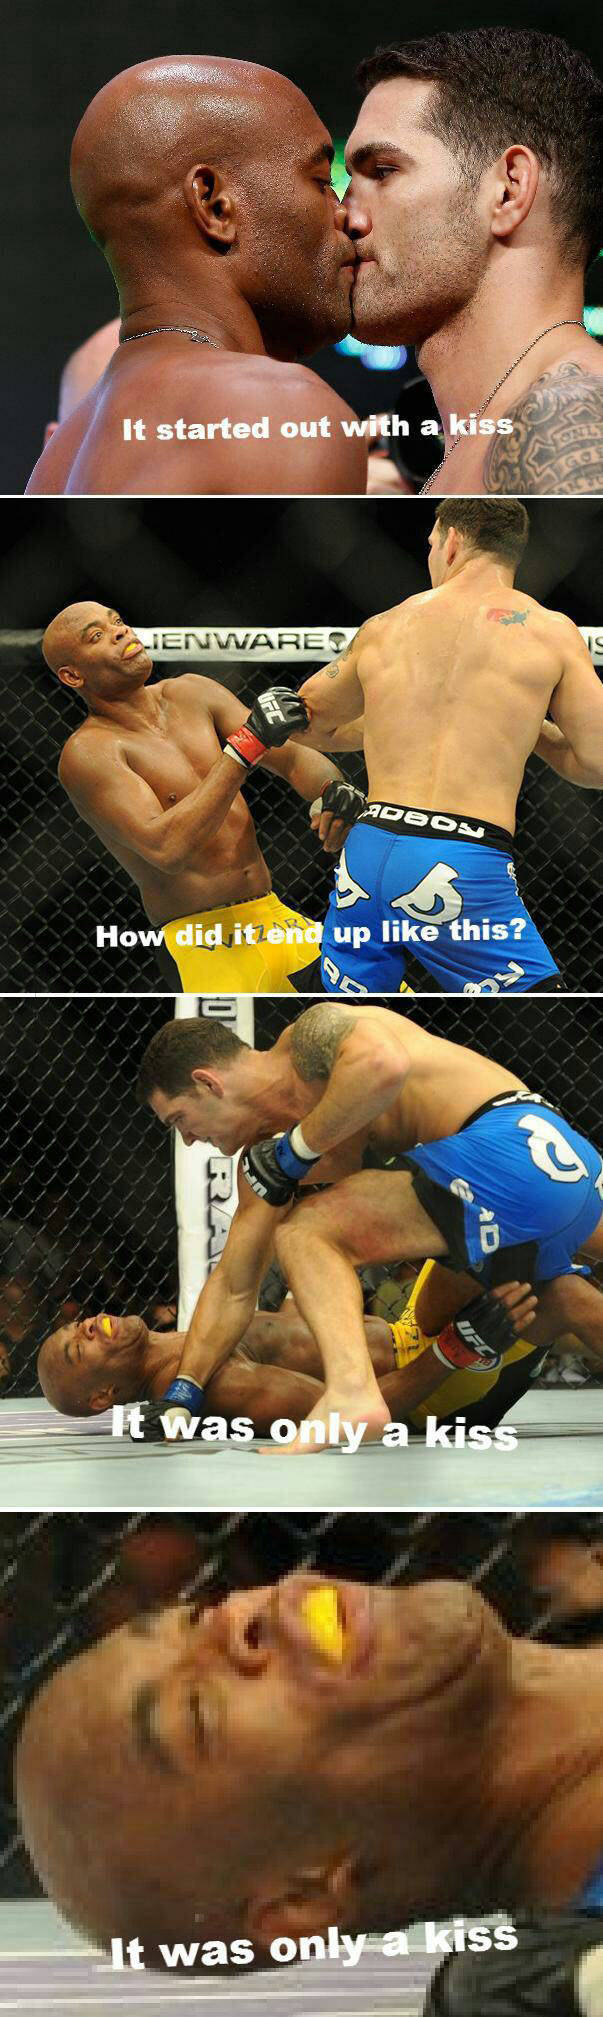 It started out with a kiss. How did it end up like this? Chris Weidman and Anderson Silva.